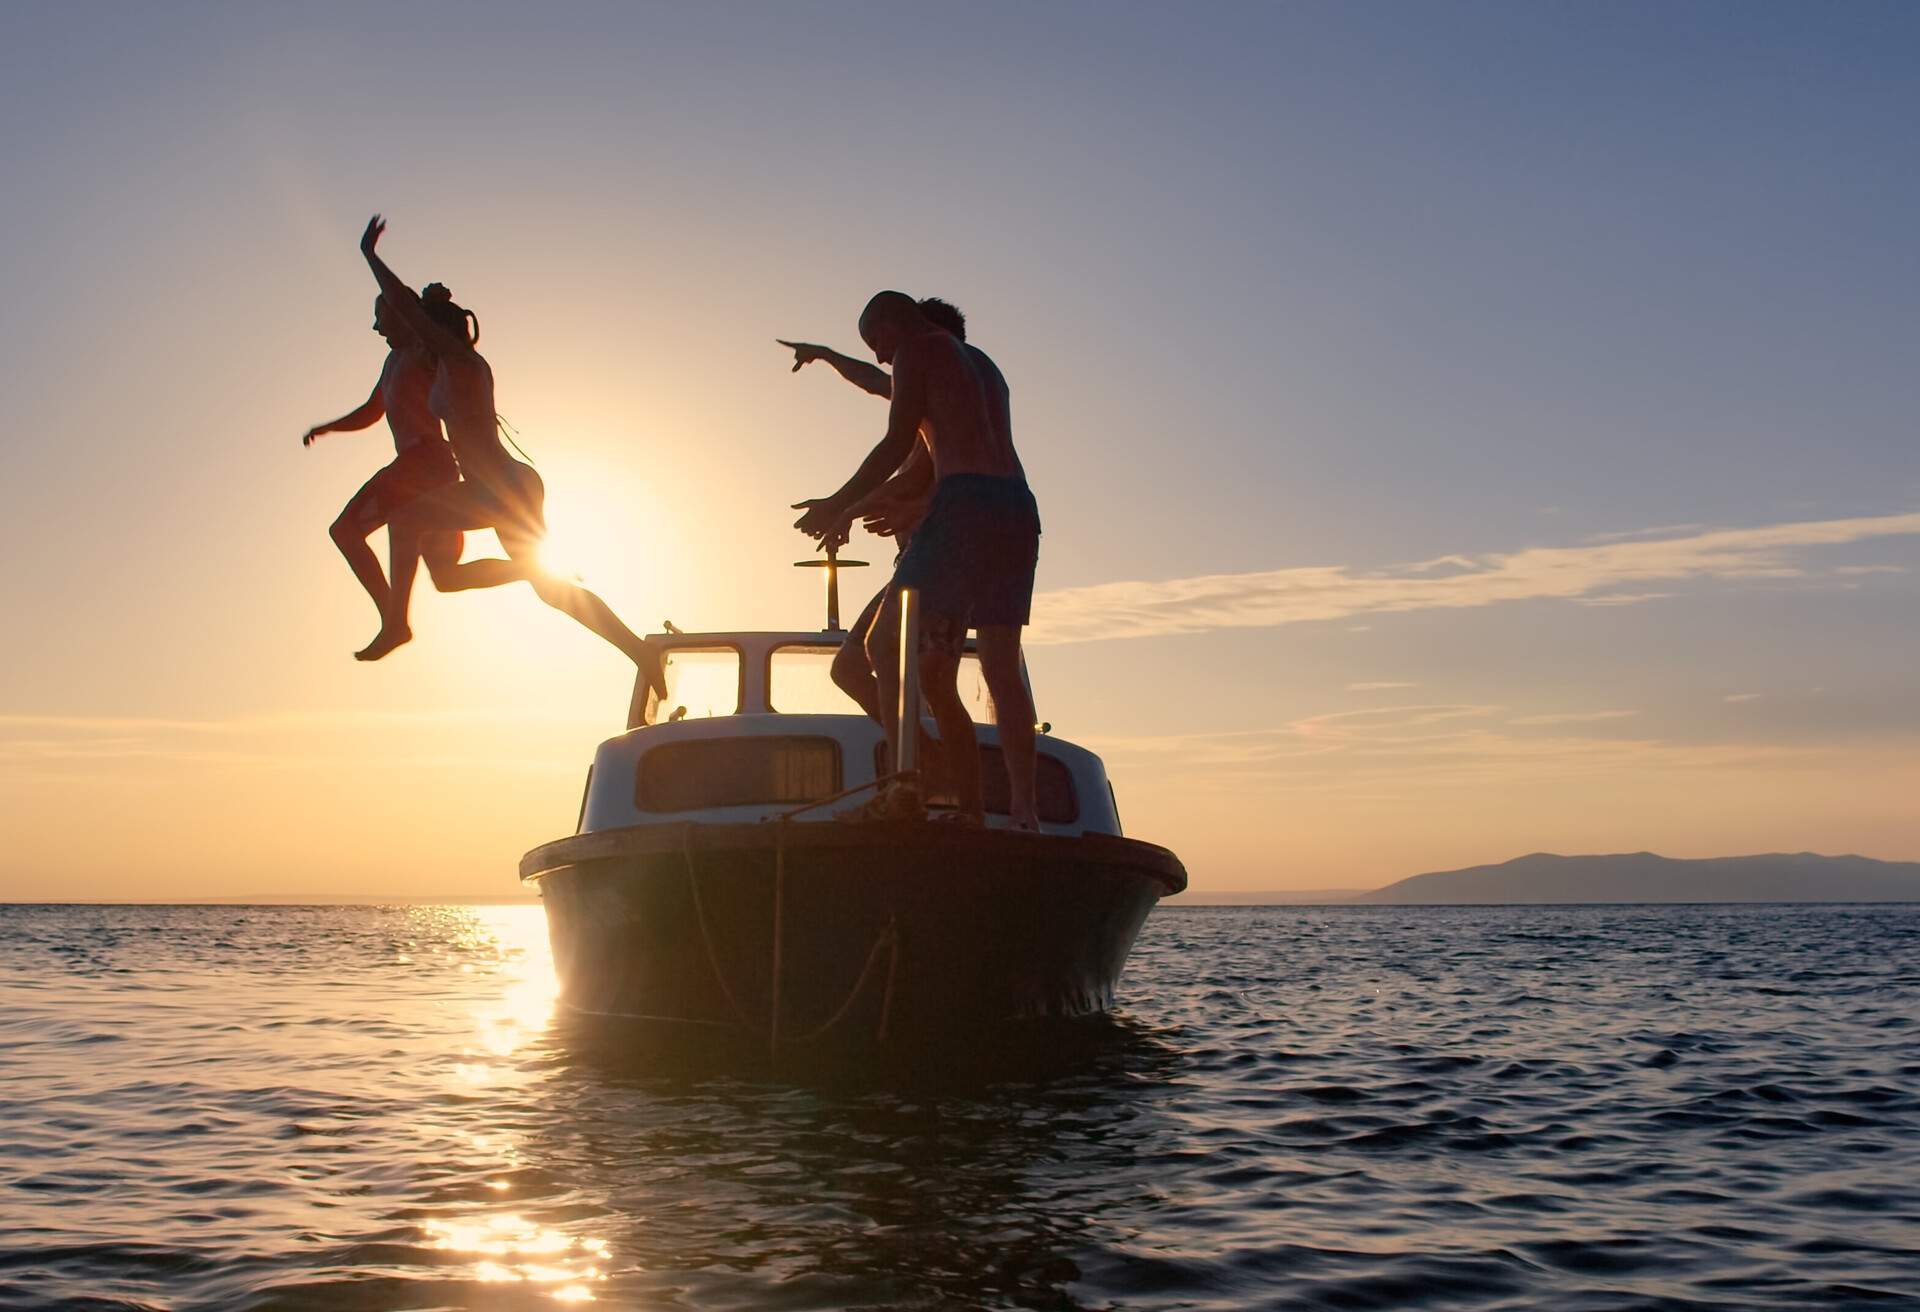 Friends diving into water from motorboat during sunset.